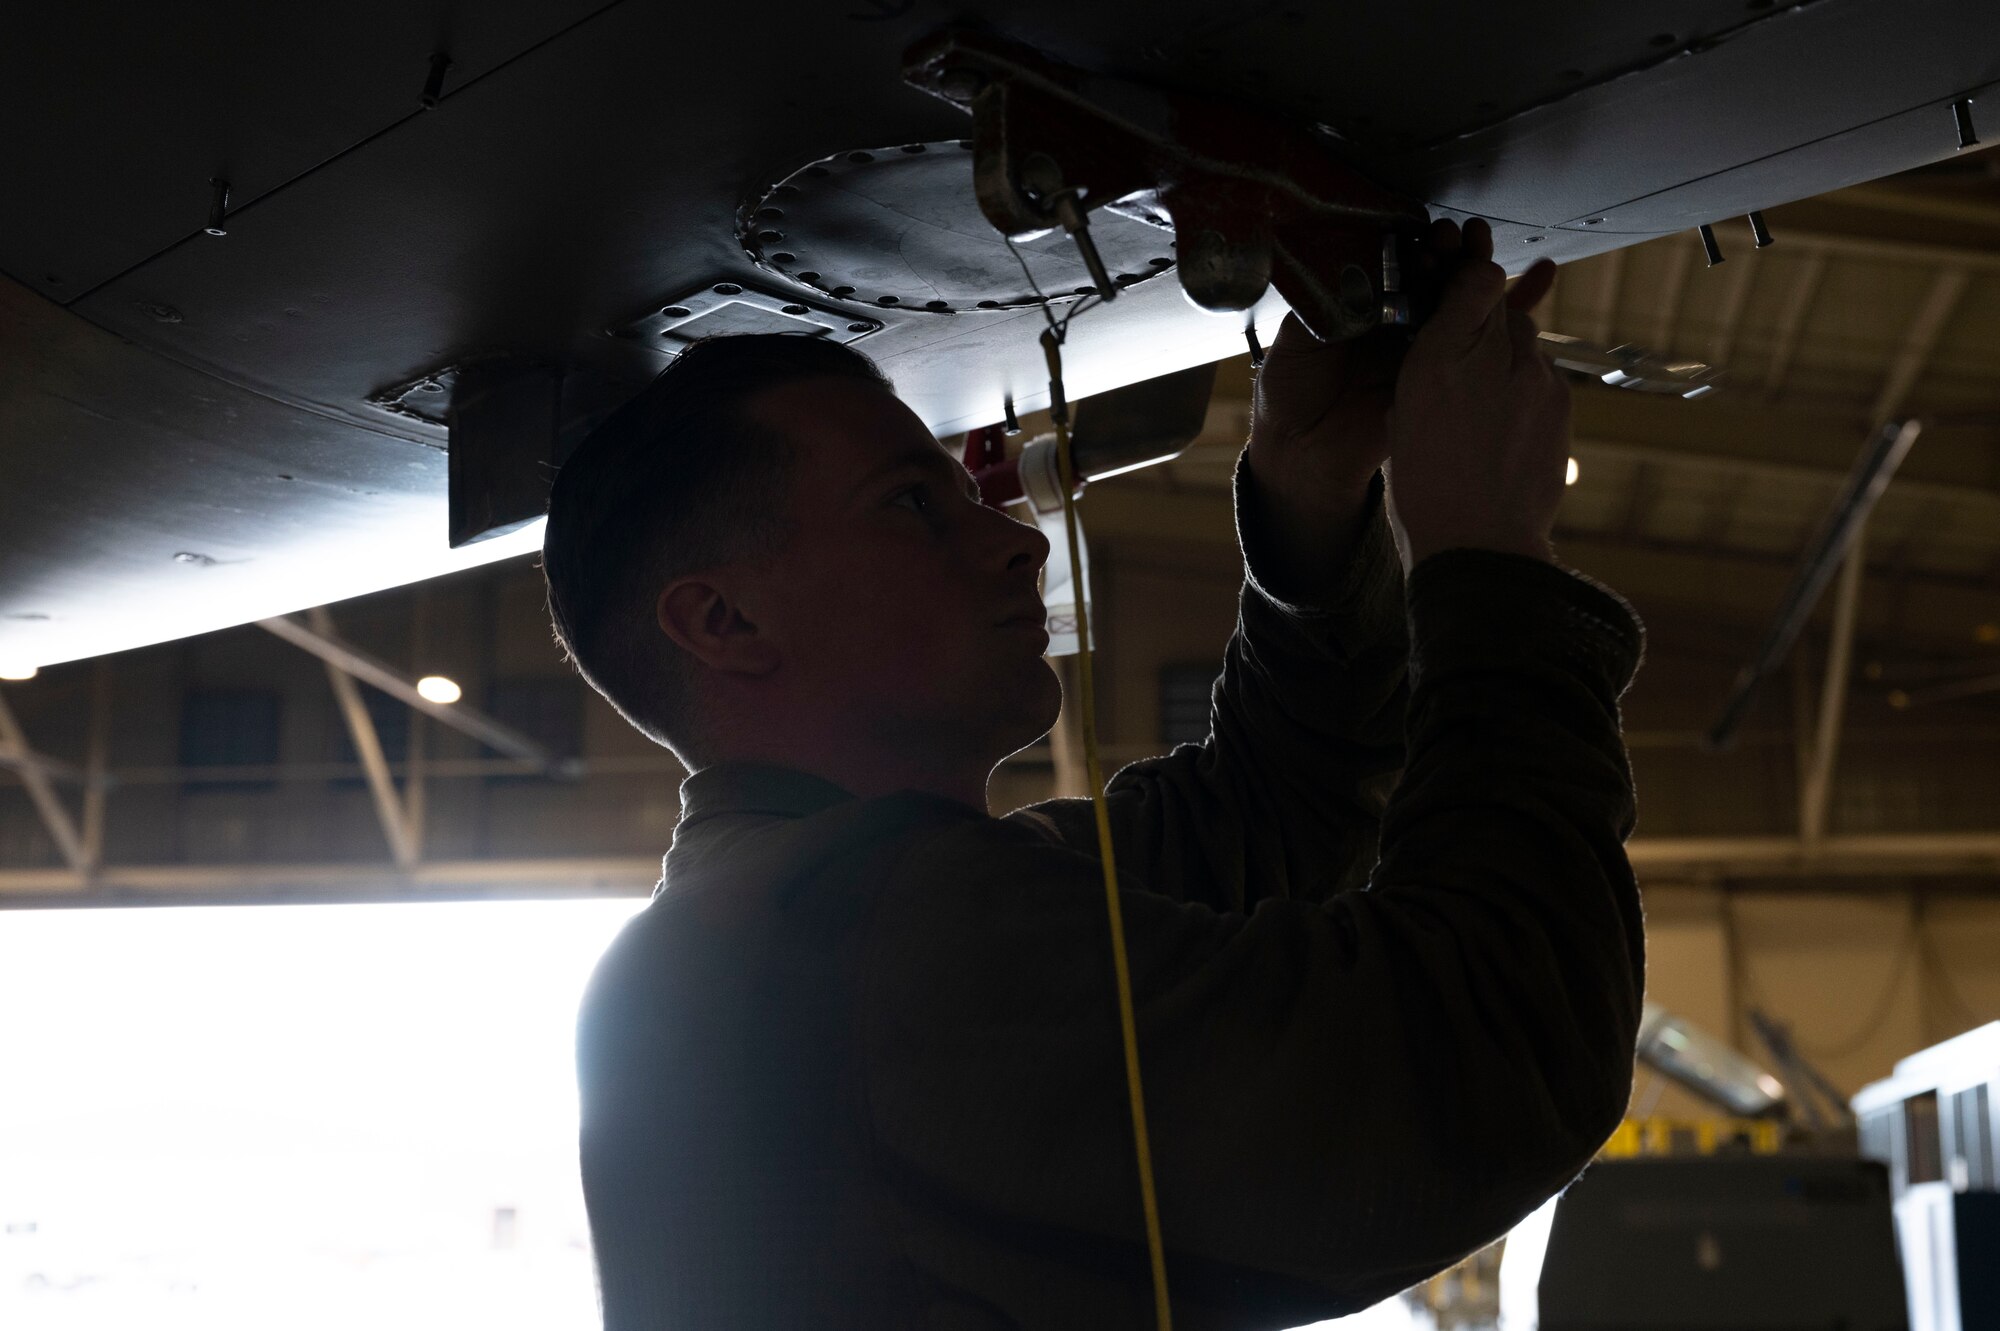 U.S. Air Force Staff Sgt. Elliott Tuepker, 49th Equipment Maintenance Squadron aircraft inspection section journeyman, prepares to lift an F-16 Viper for an inspection at Holloman Air Force Base, New Mexico, Dec. 1, 2023. Phase inspections are performed with high attention to detail to ensure all F-16s are ready for operational use. (U.S. Air Force photo by Airman 1st Class Isaiah Pedrazzini)